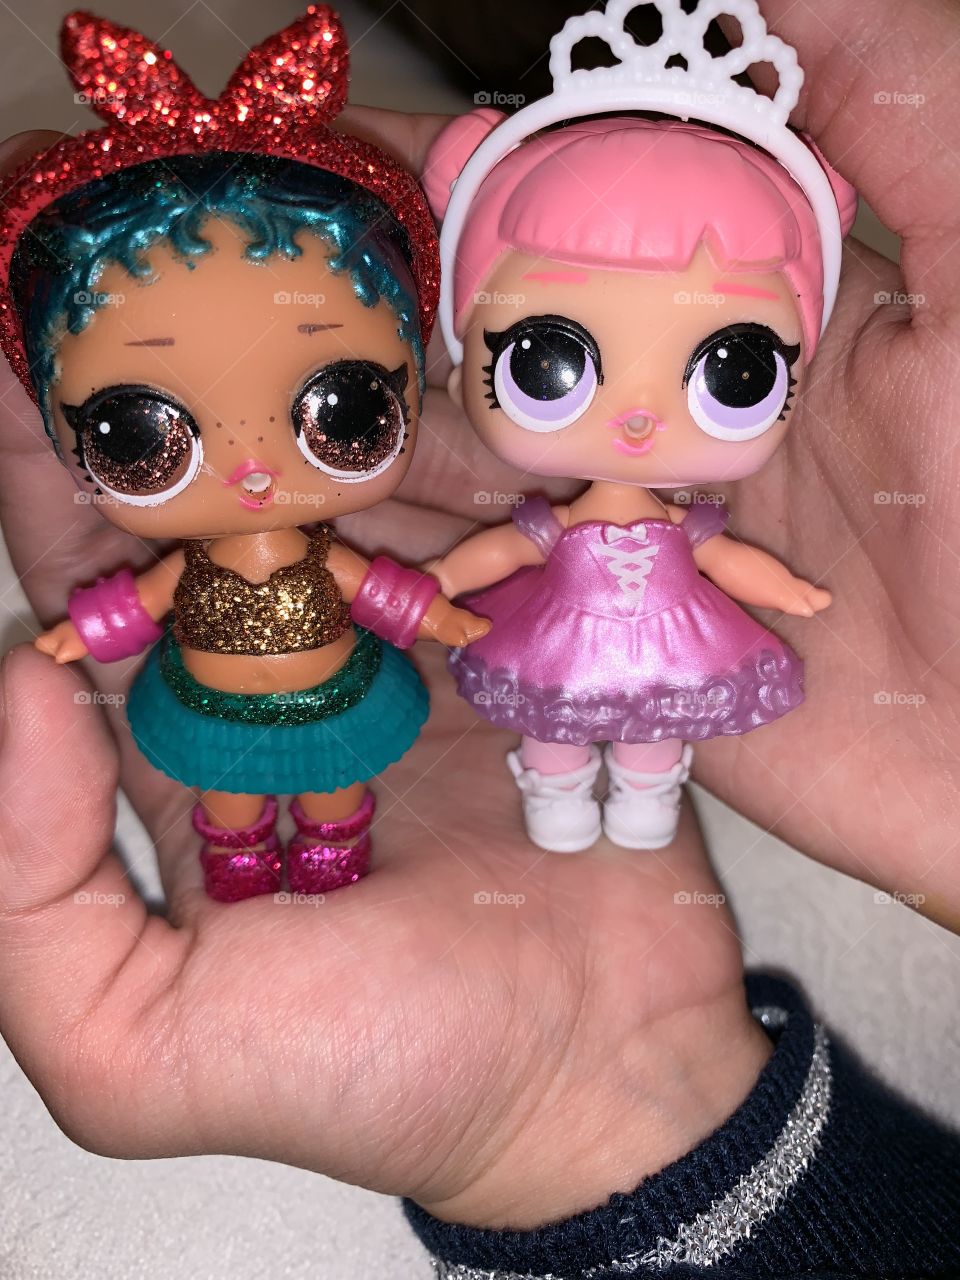 Center Stage and Coconut Q.T. My daughter’s dolls